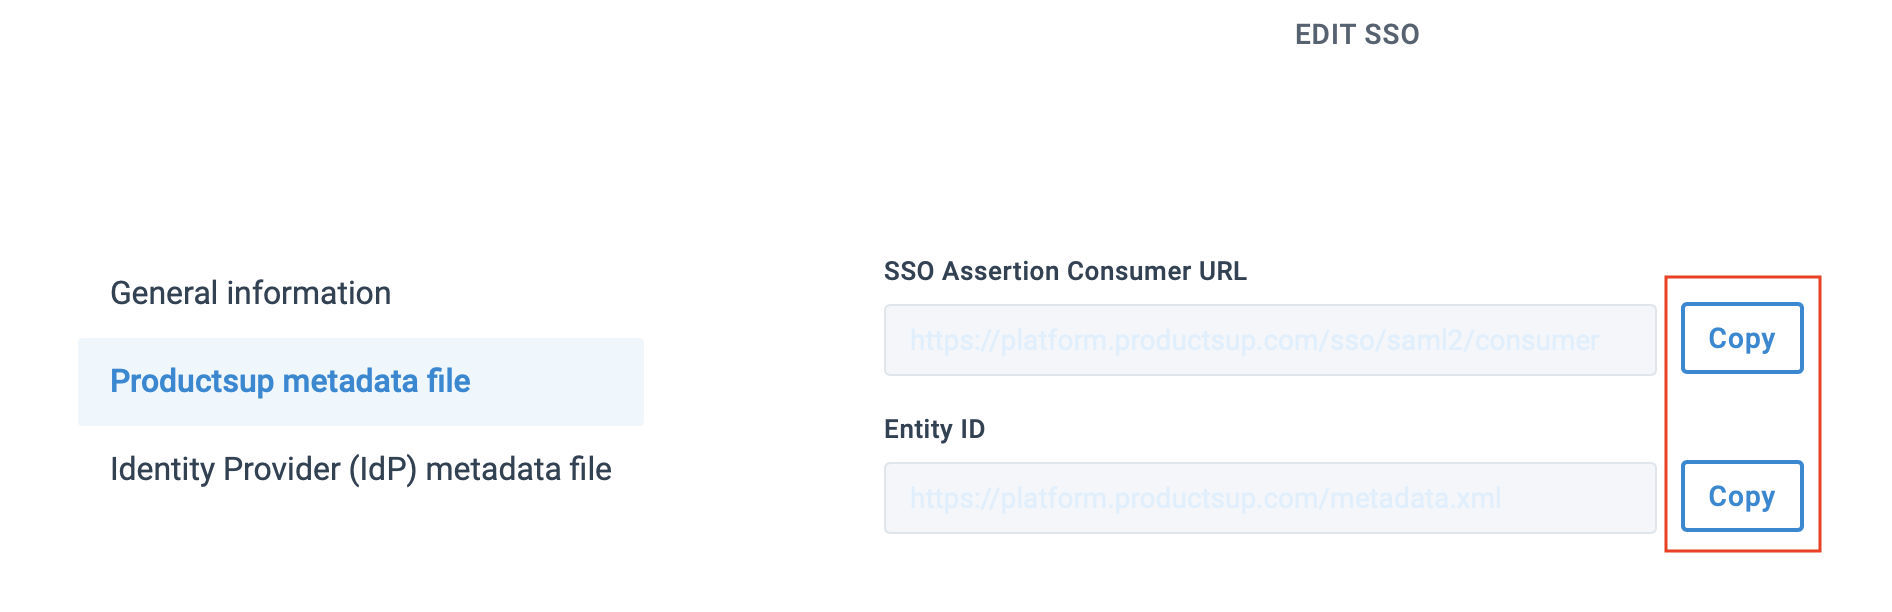 Copy SSO Assertion Consumer URL to pass to IdP in Productsup